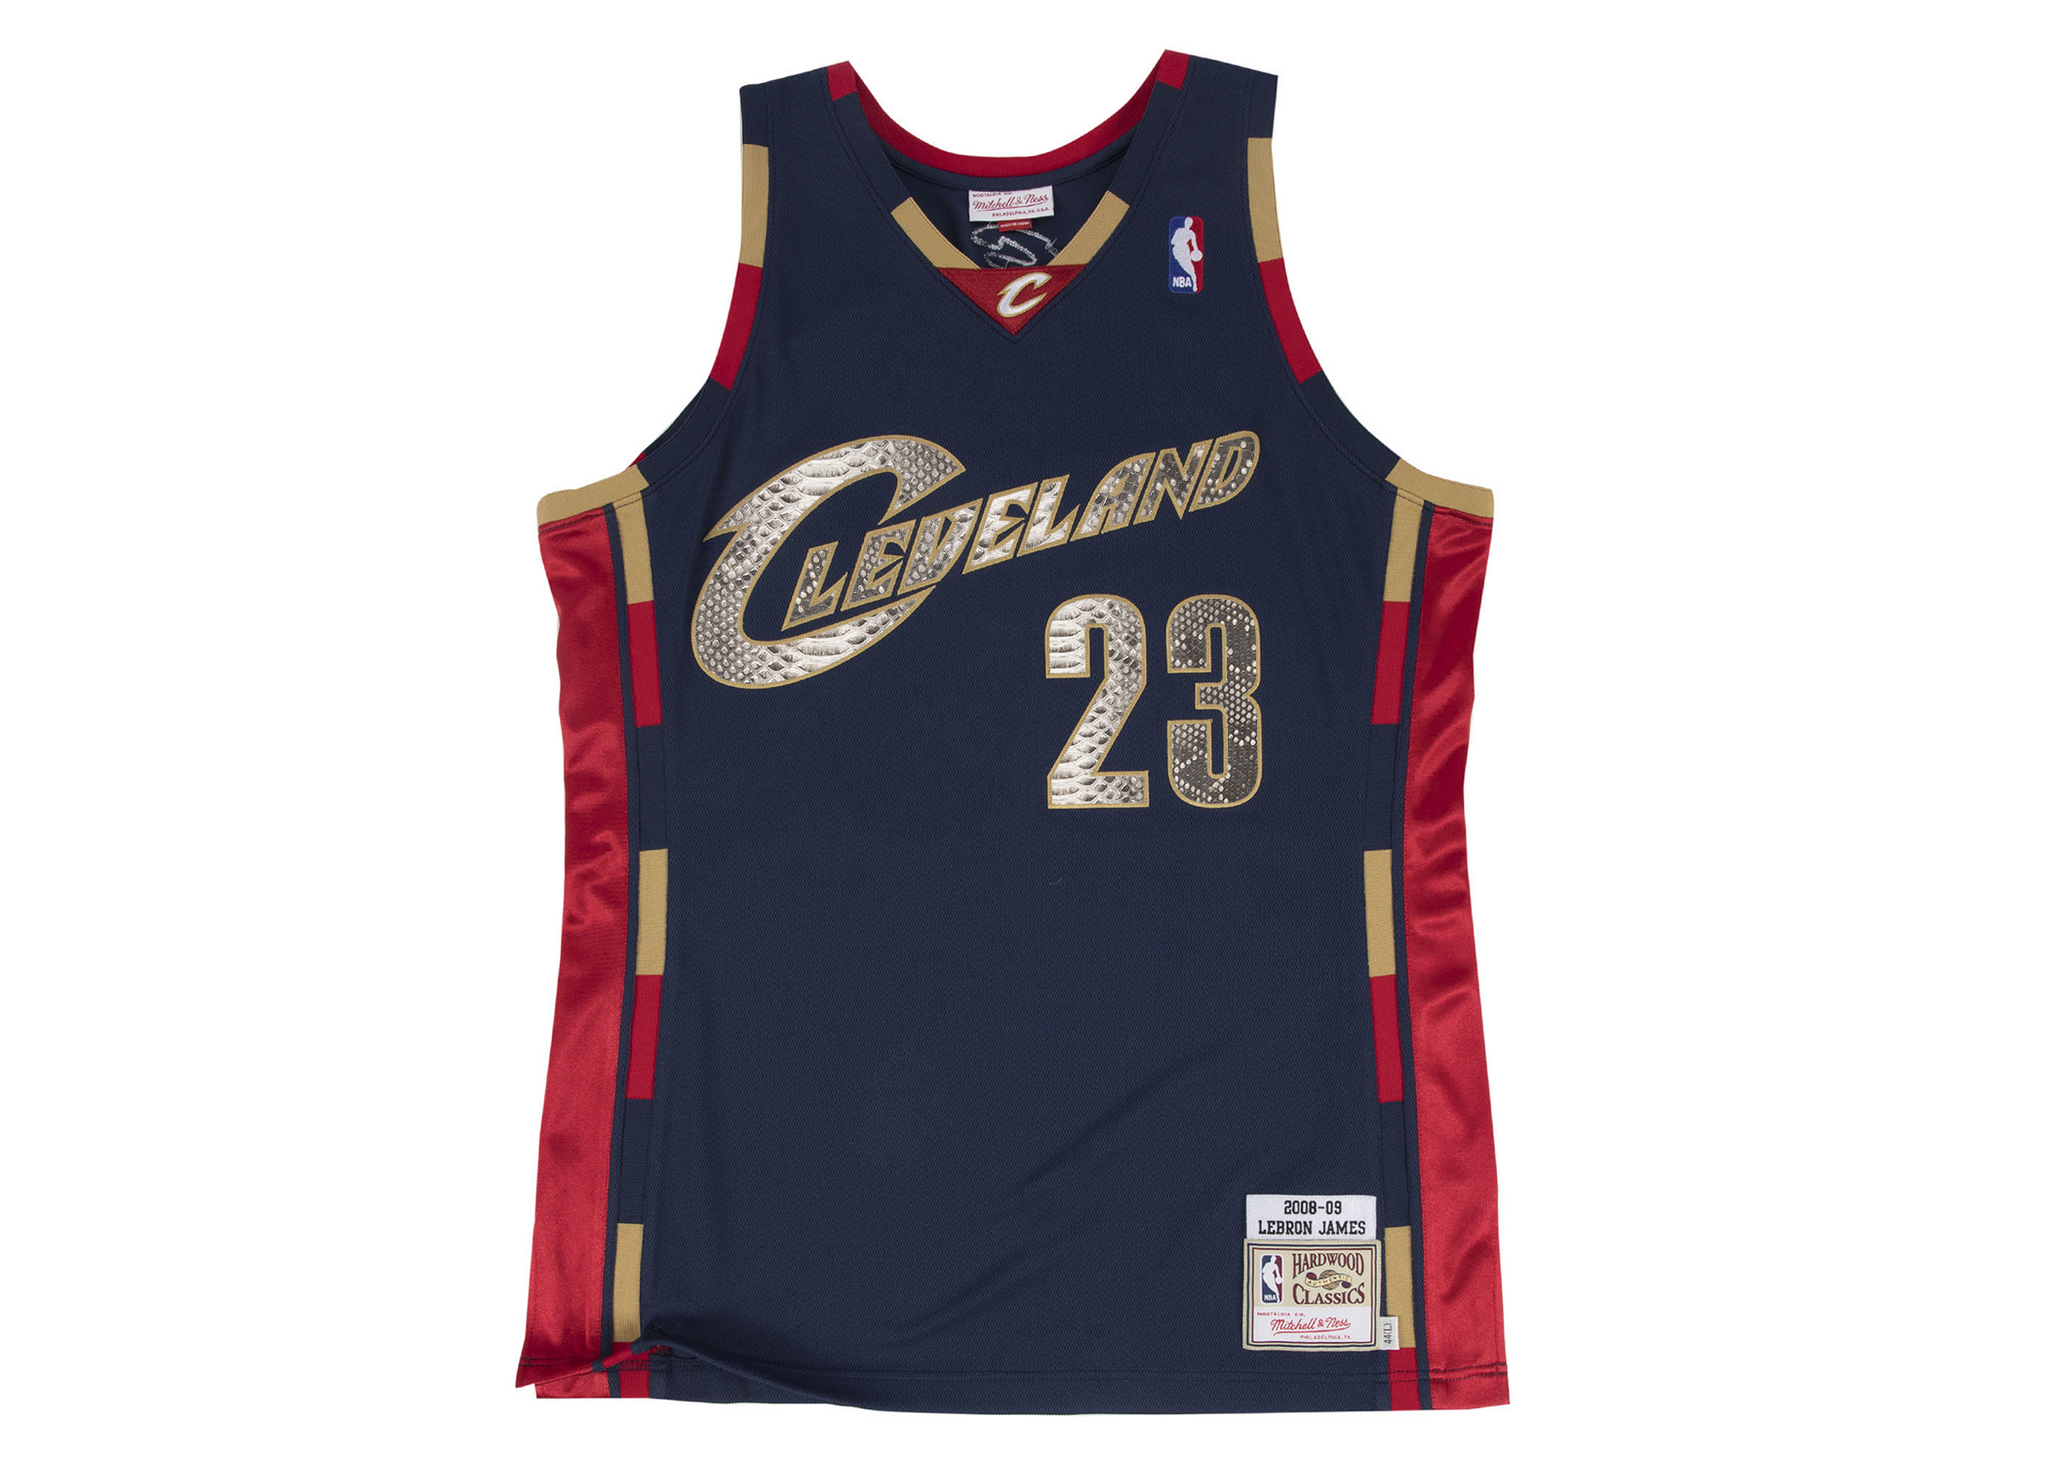 LeBron James leads the NBA jersey sales